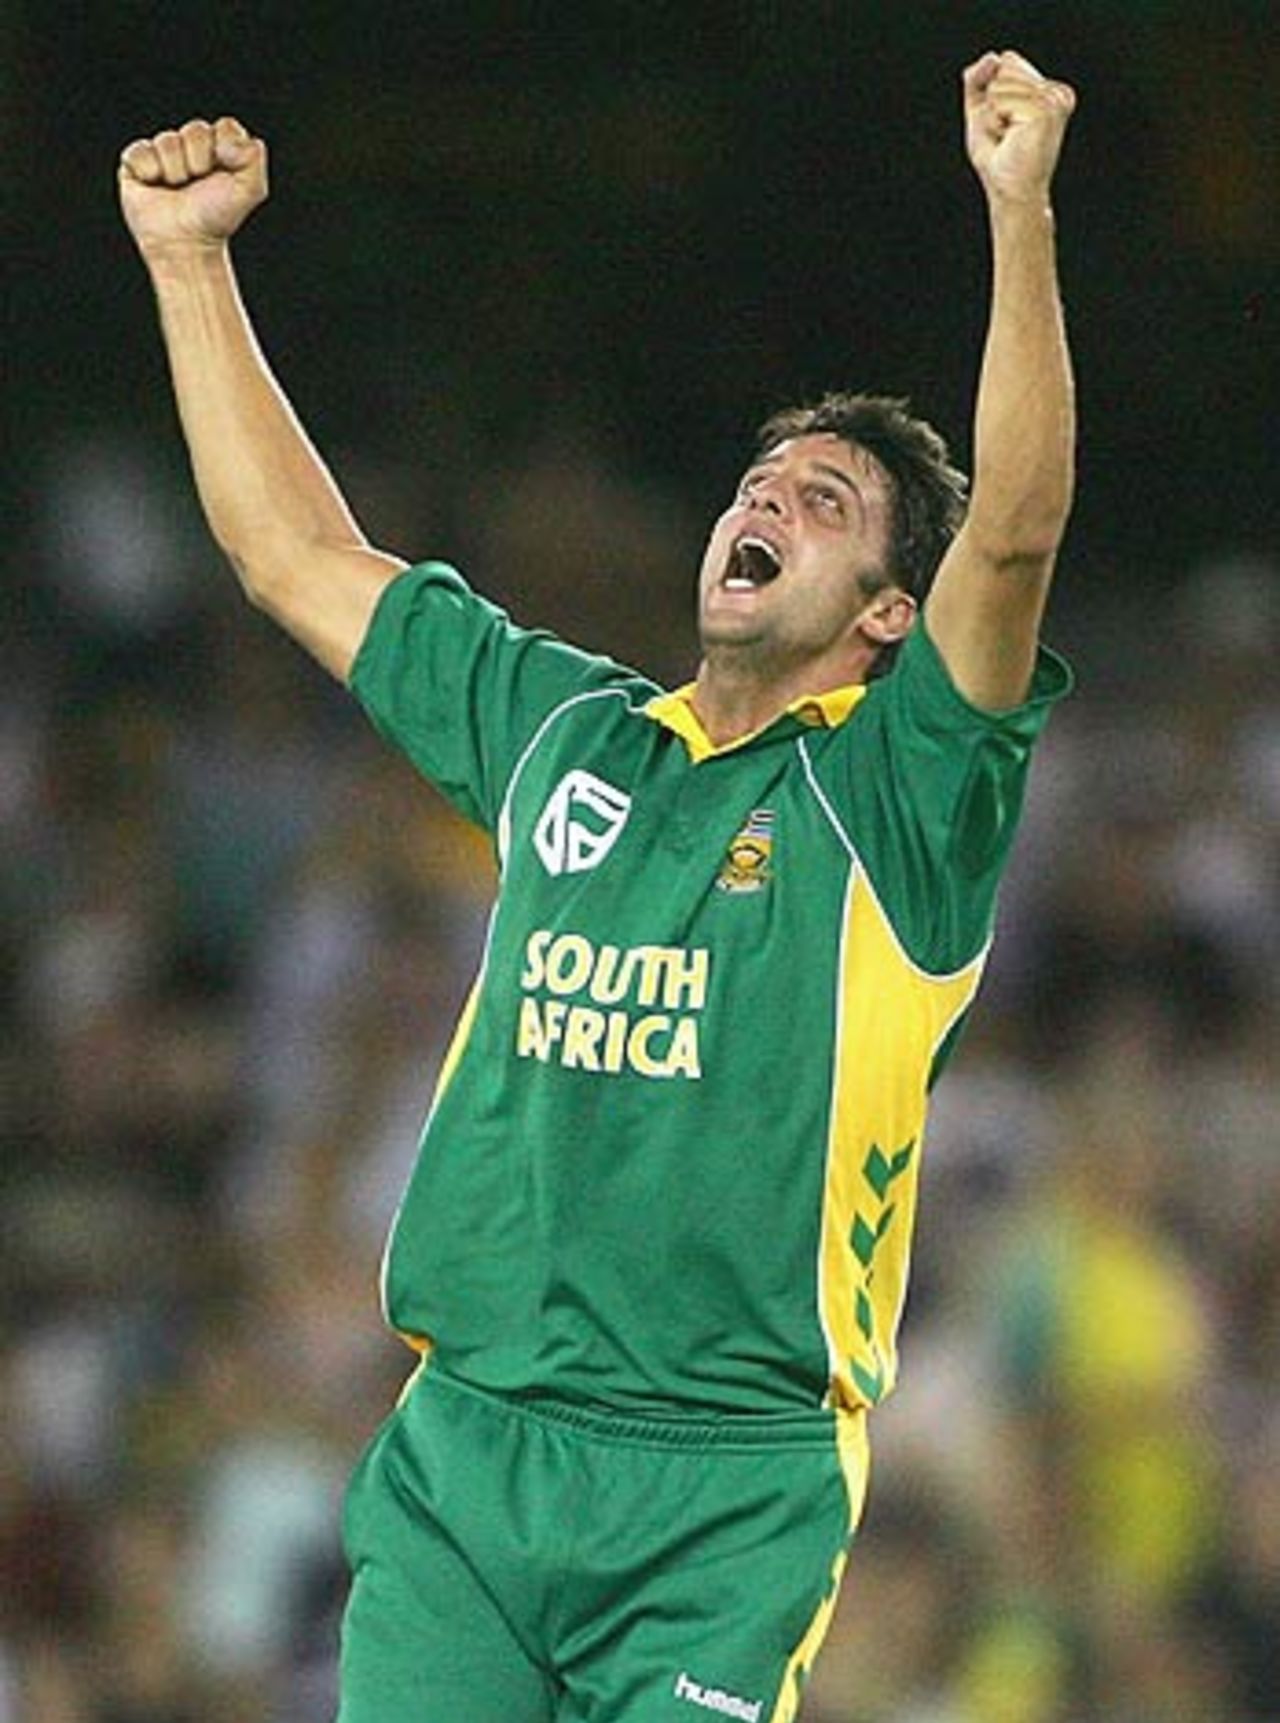 Johannes van der Wath took two wickets on debut , Australia v South Africa, VB Series, Telstra Dome, Melbourne, January 20, 2006